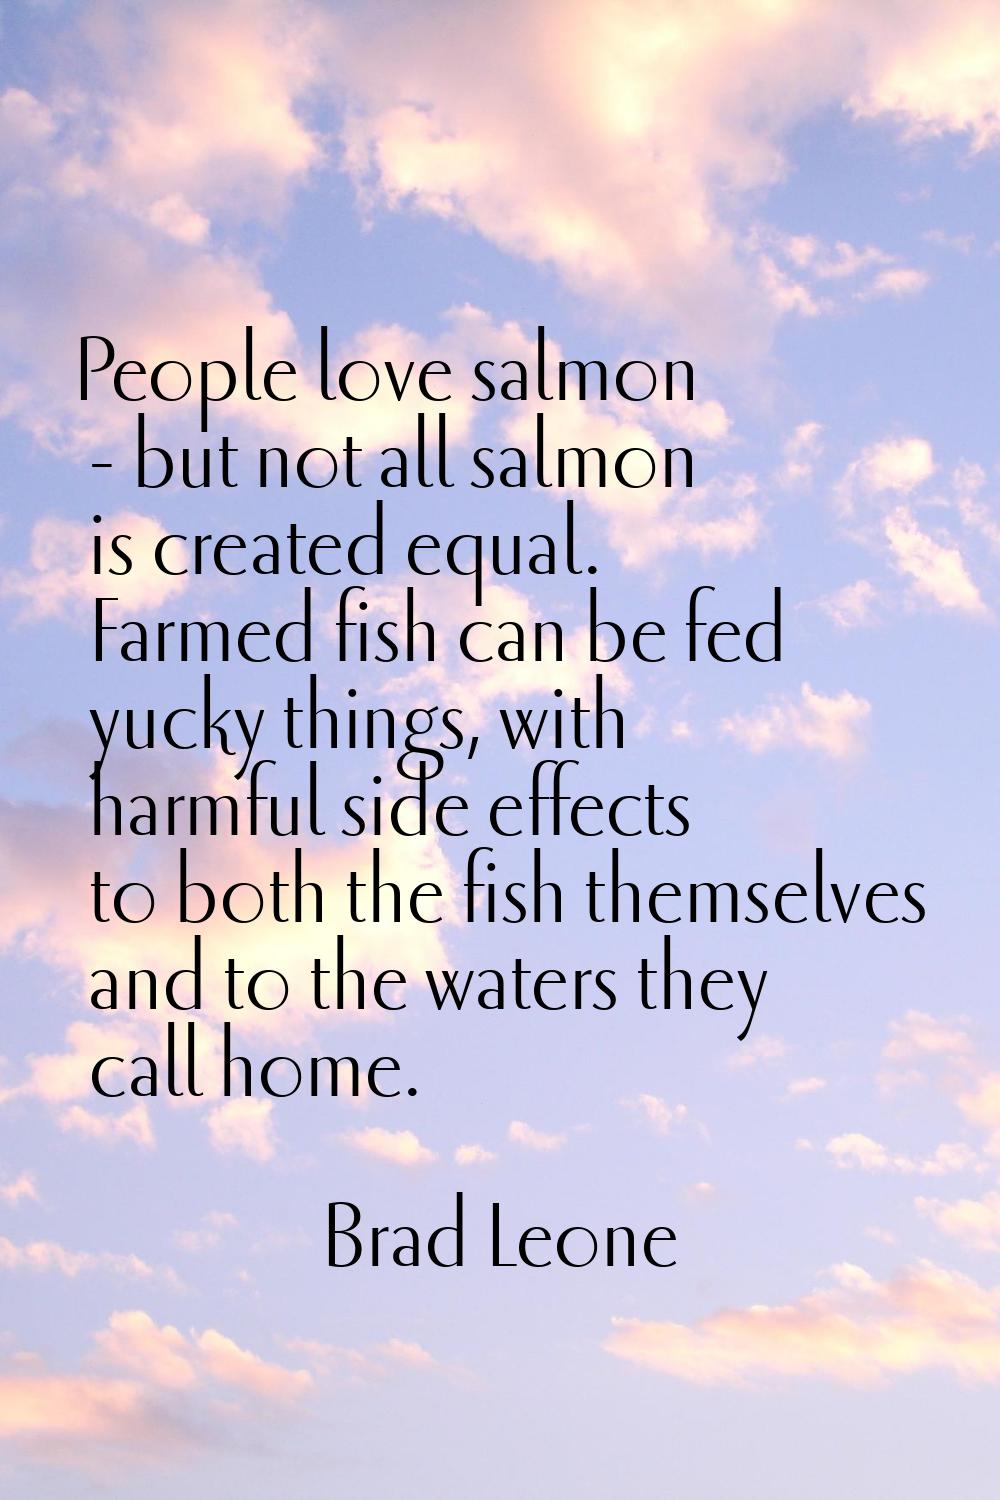 People love salmon - but not all salmon is created equal. Farmed fish can be fed yucky things, with